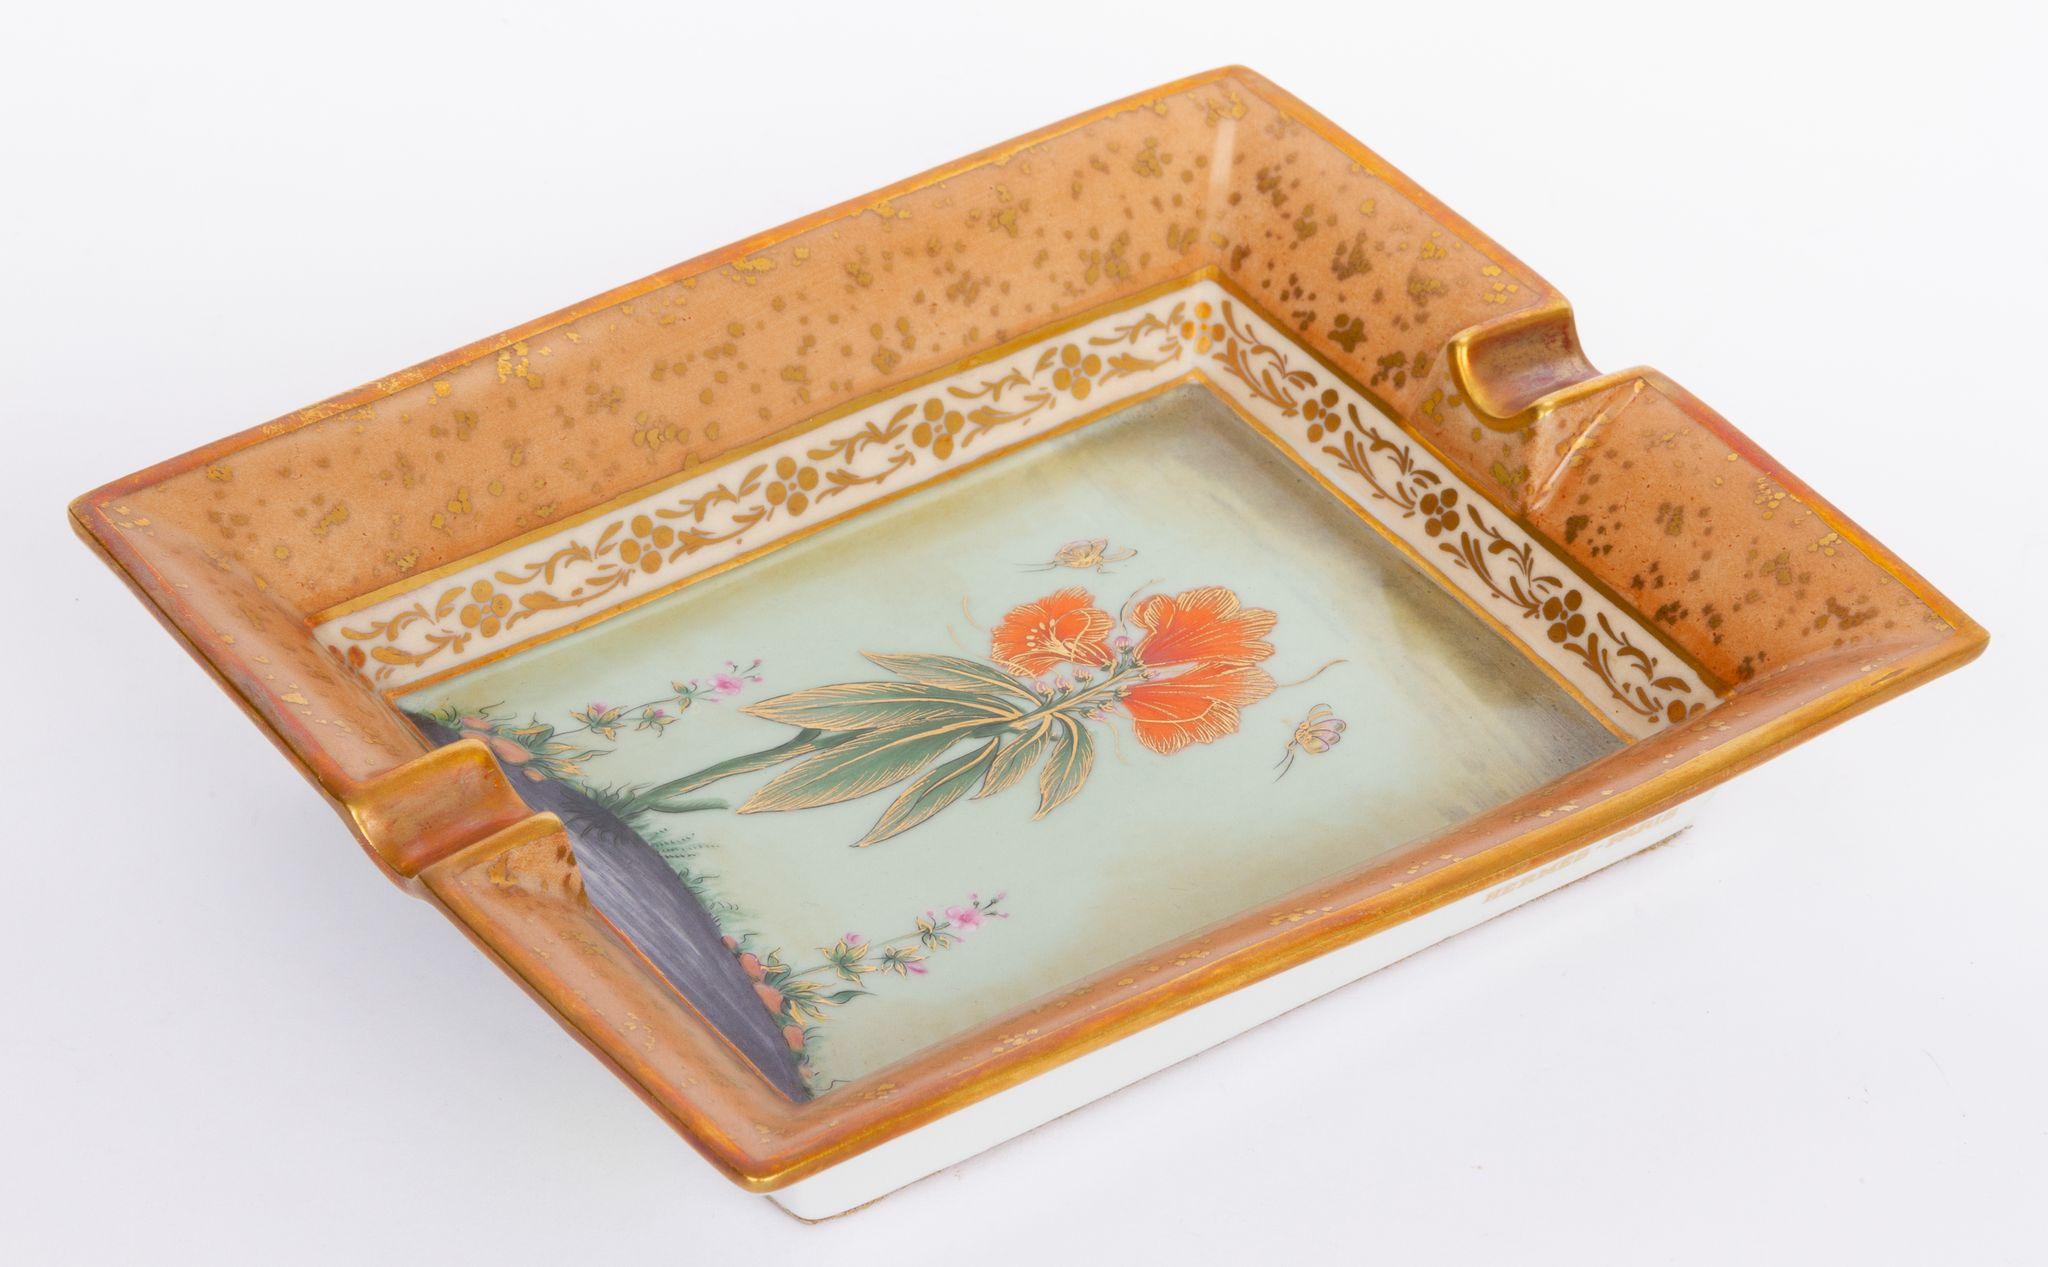 Hermès vintage ashtray in a beige golden tone. The center of the piece shows a red flower. And the edges are in a gold ornamental style. The ashtray is in excellent condition and comes with the original box.